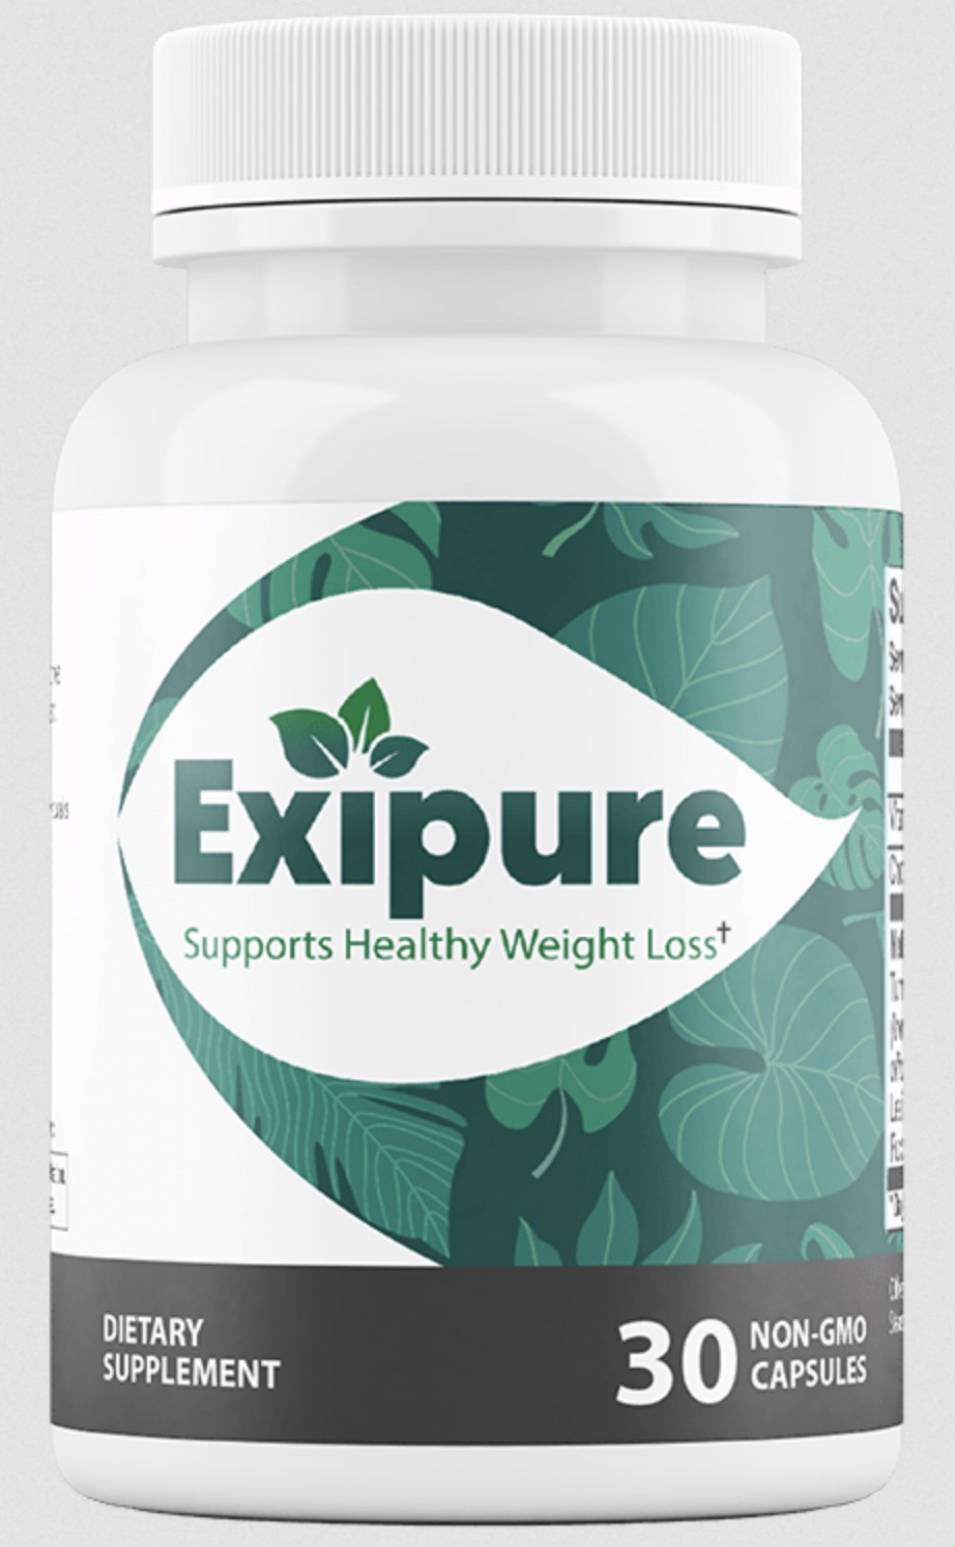 Is Exipure Safe And Does It Work